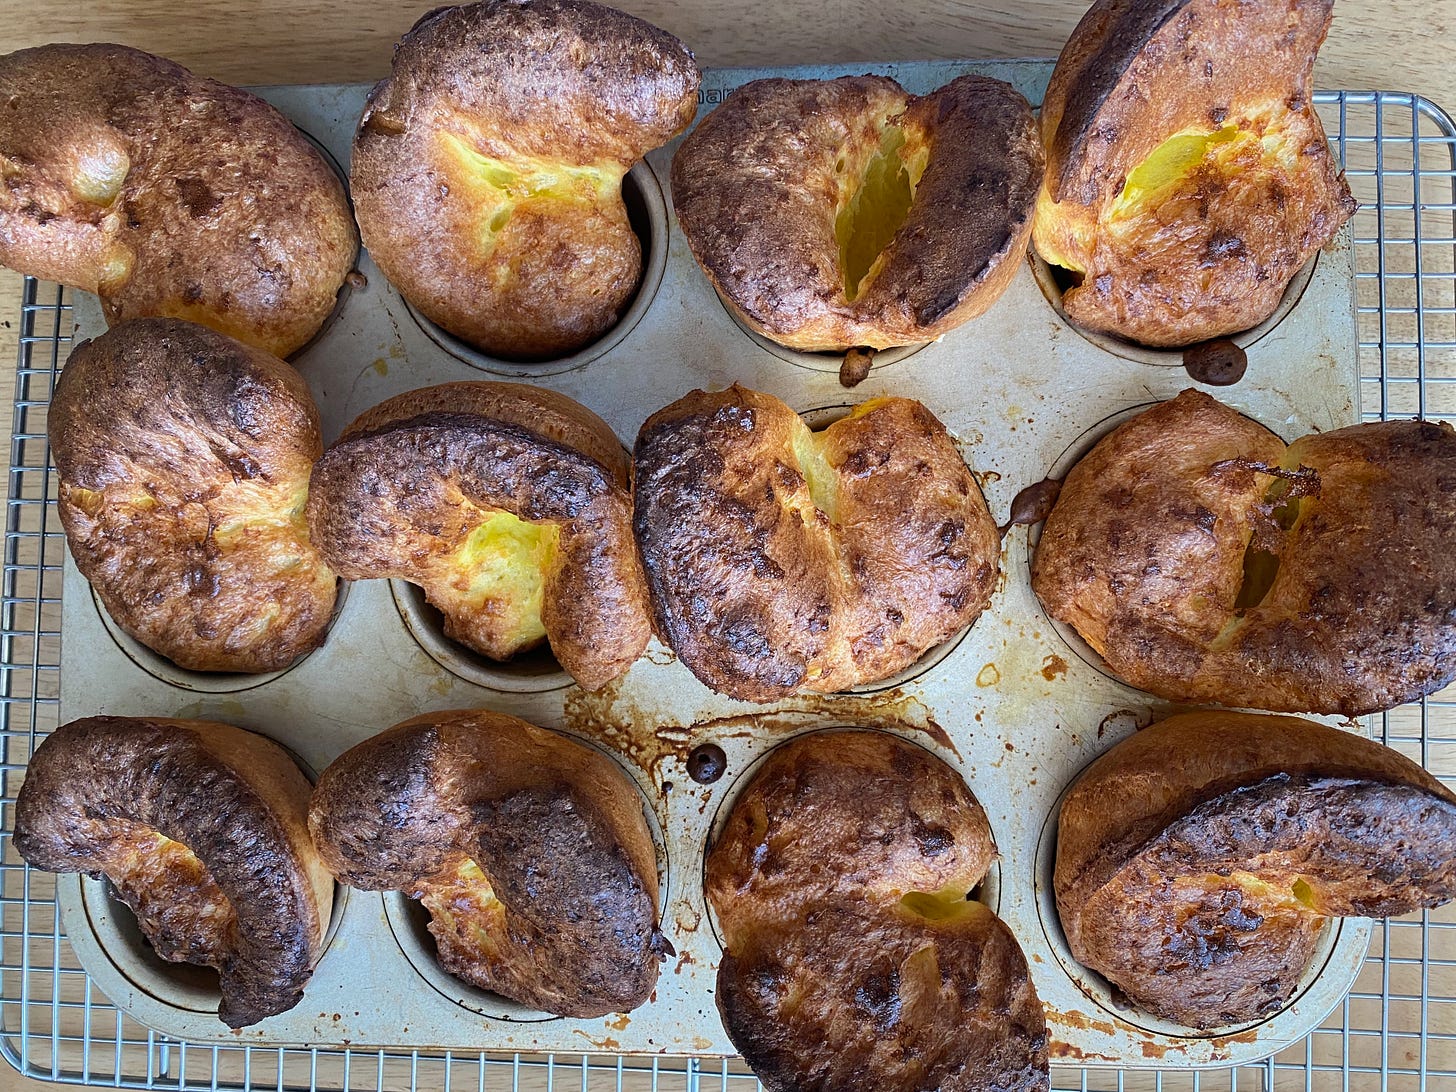 A muffin tin holding 12 tall golden brown popovers, all puffed up in various irregular shapes, most with a small crack in the middle showing the lighter golden inside.